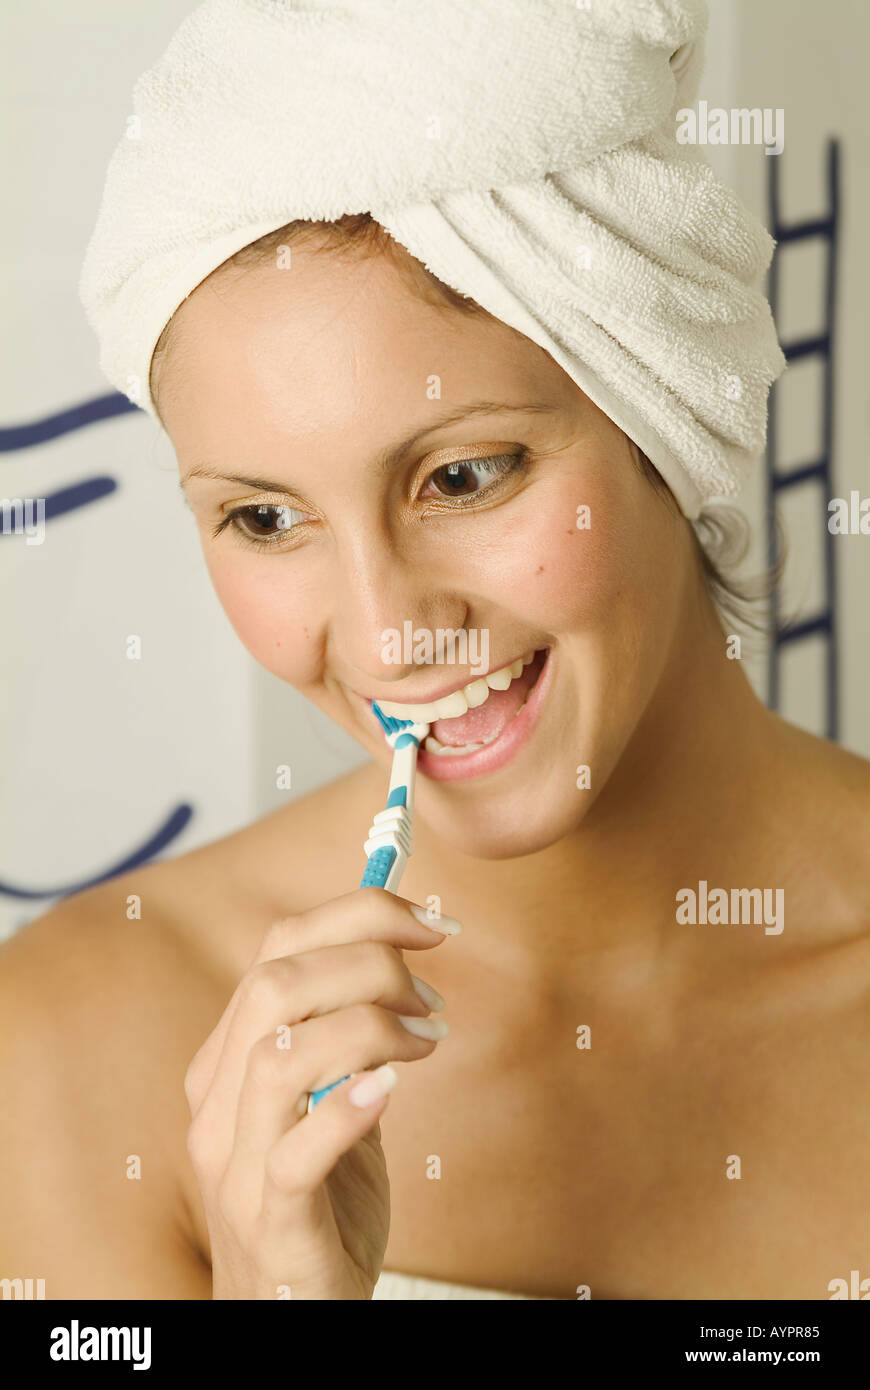 A young woman smiles while brushing her teeth Stock Photo